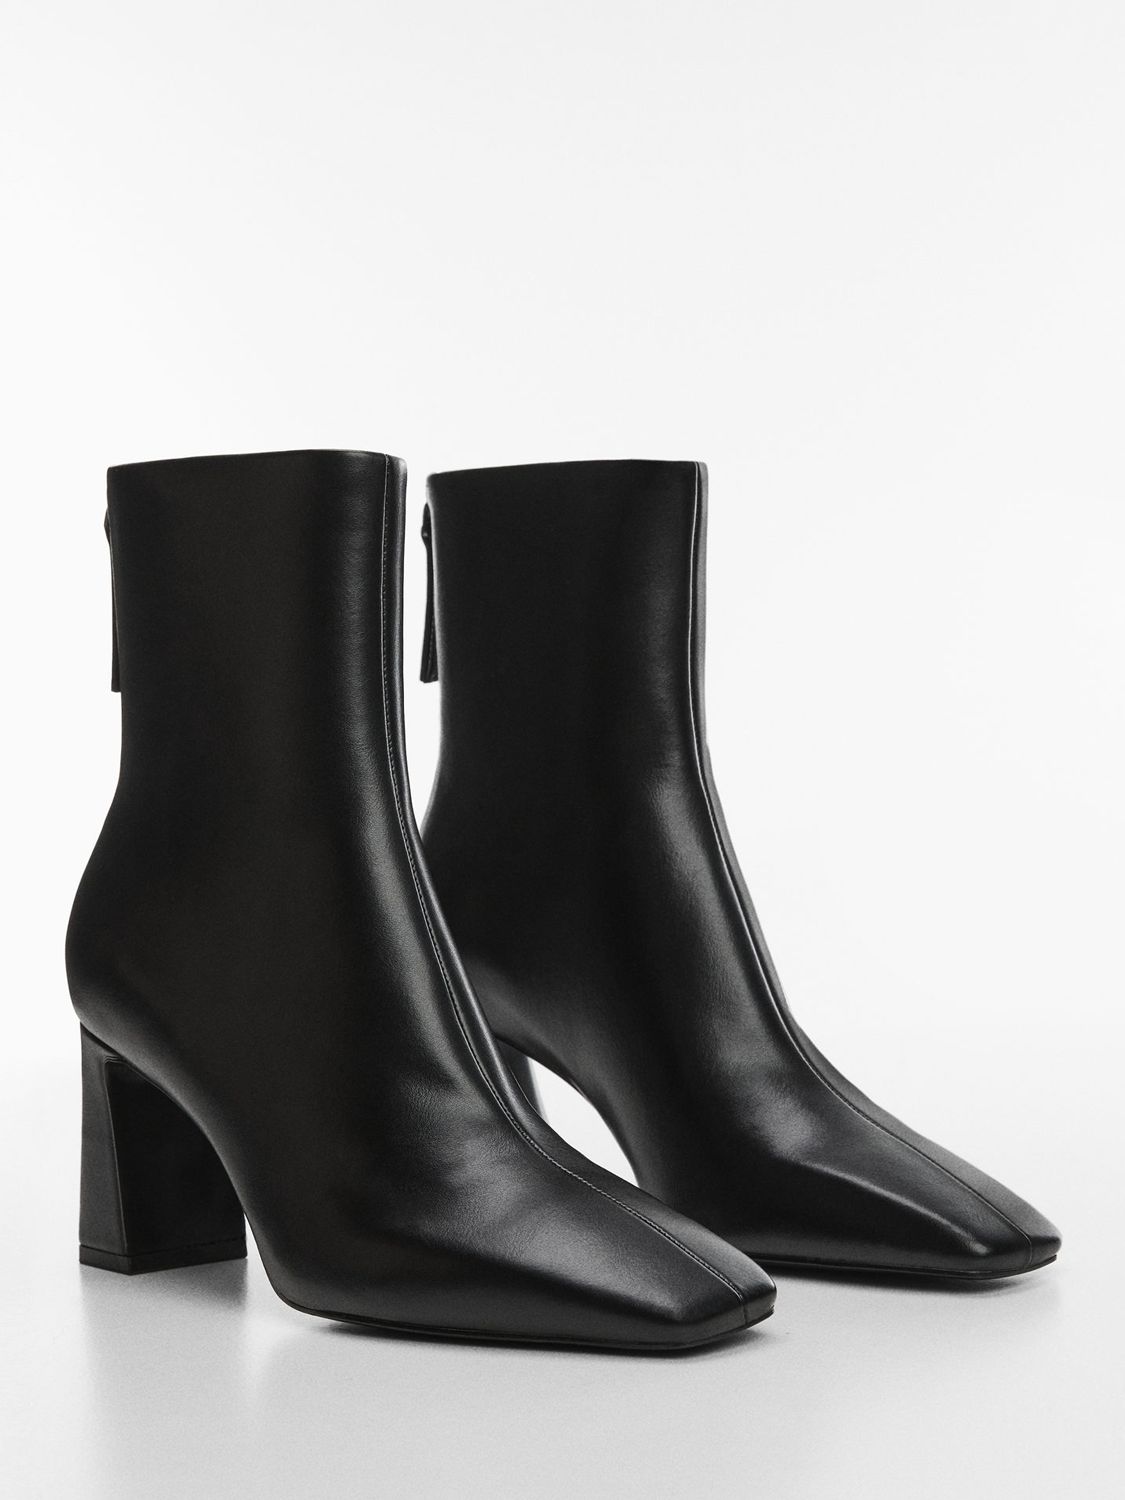 Mango Limo Faux Leather Zip Up Ankle Boot, Black at John Lewis & Partners